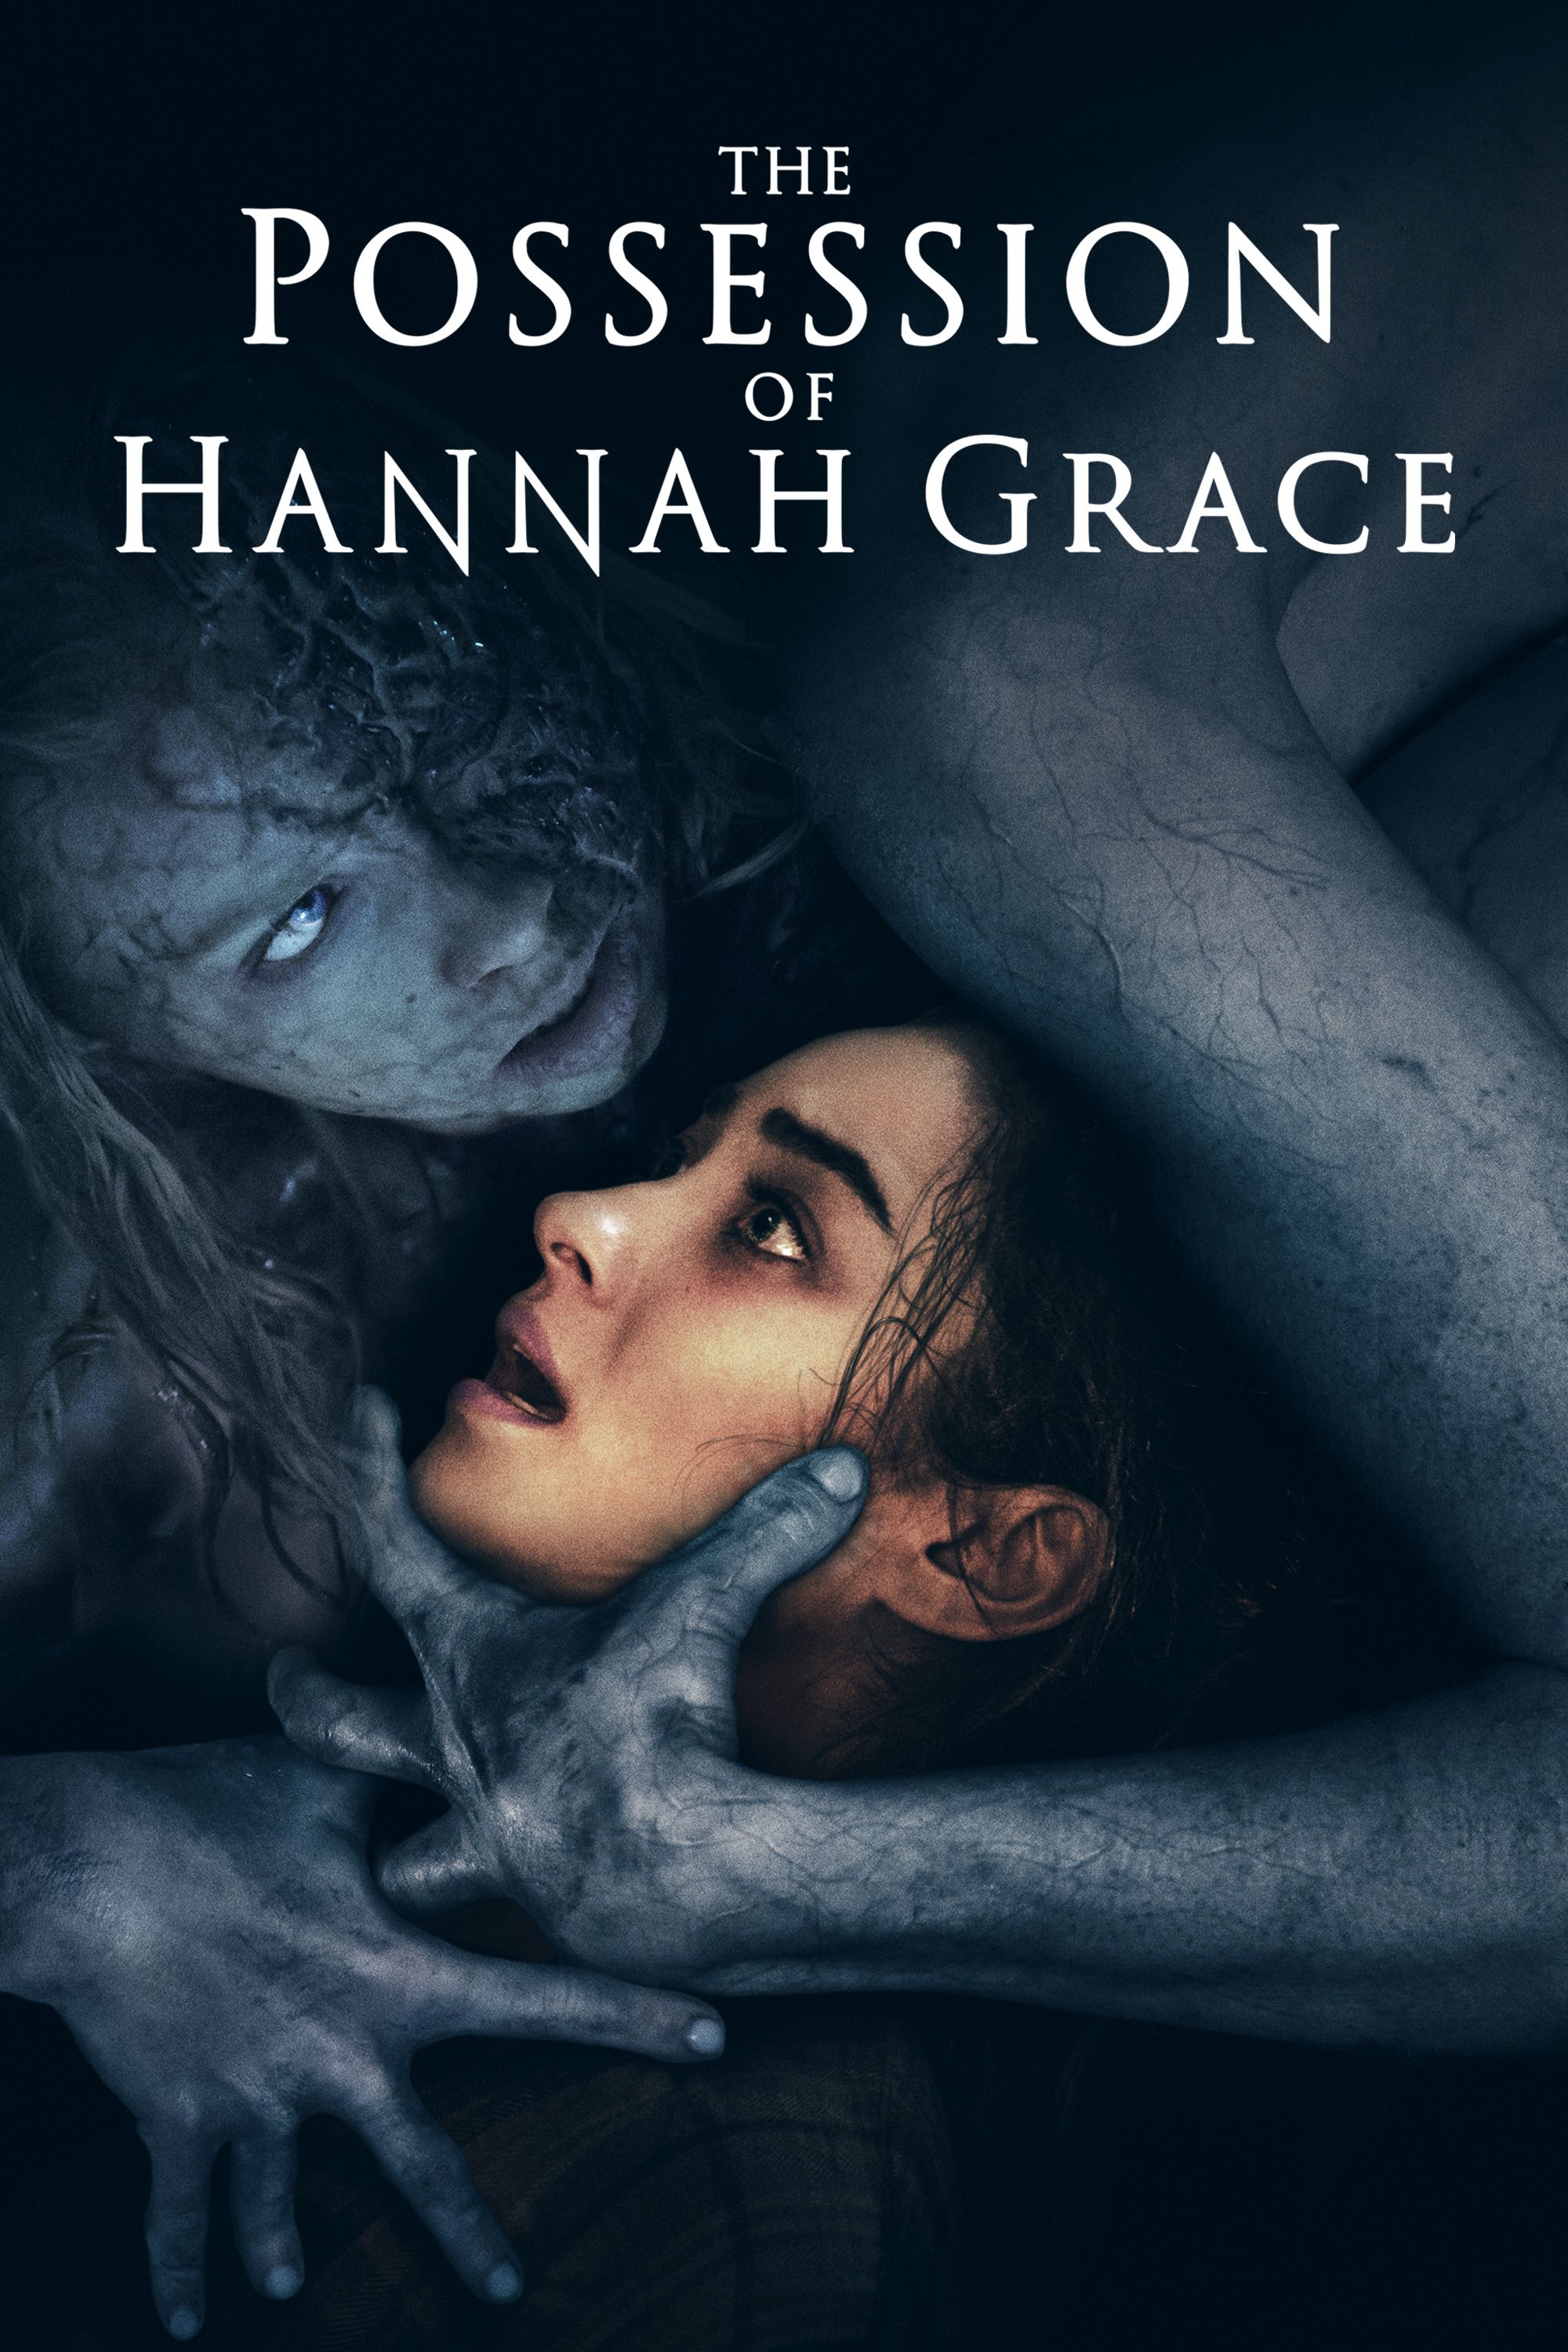 The Possession of Hannah Grace (2018) 480p BluRay Hindi ORG Dual Audio Movie MSubs [400MB]